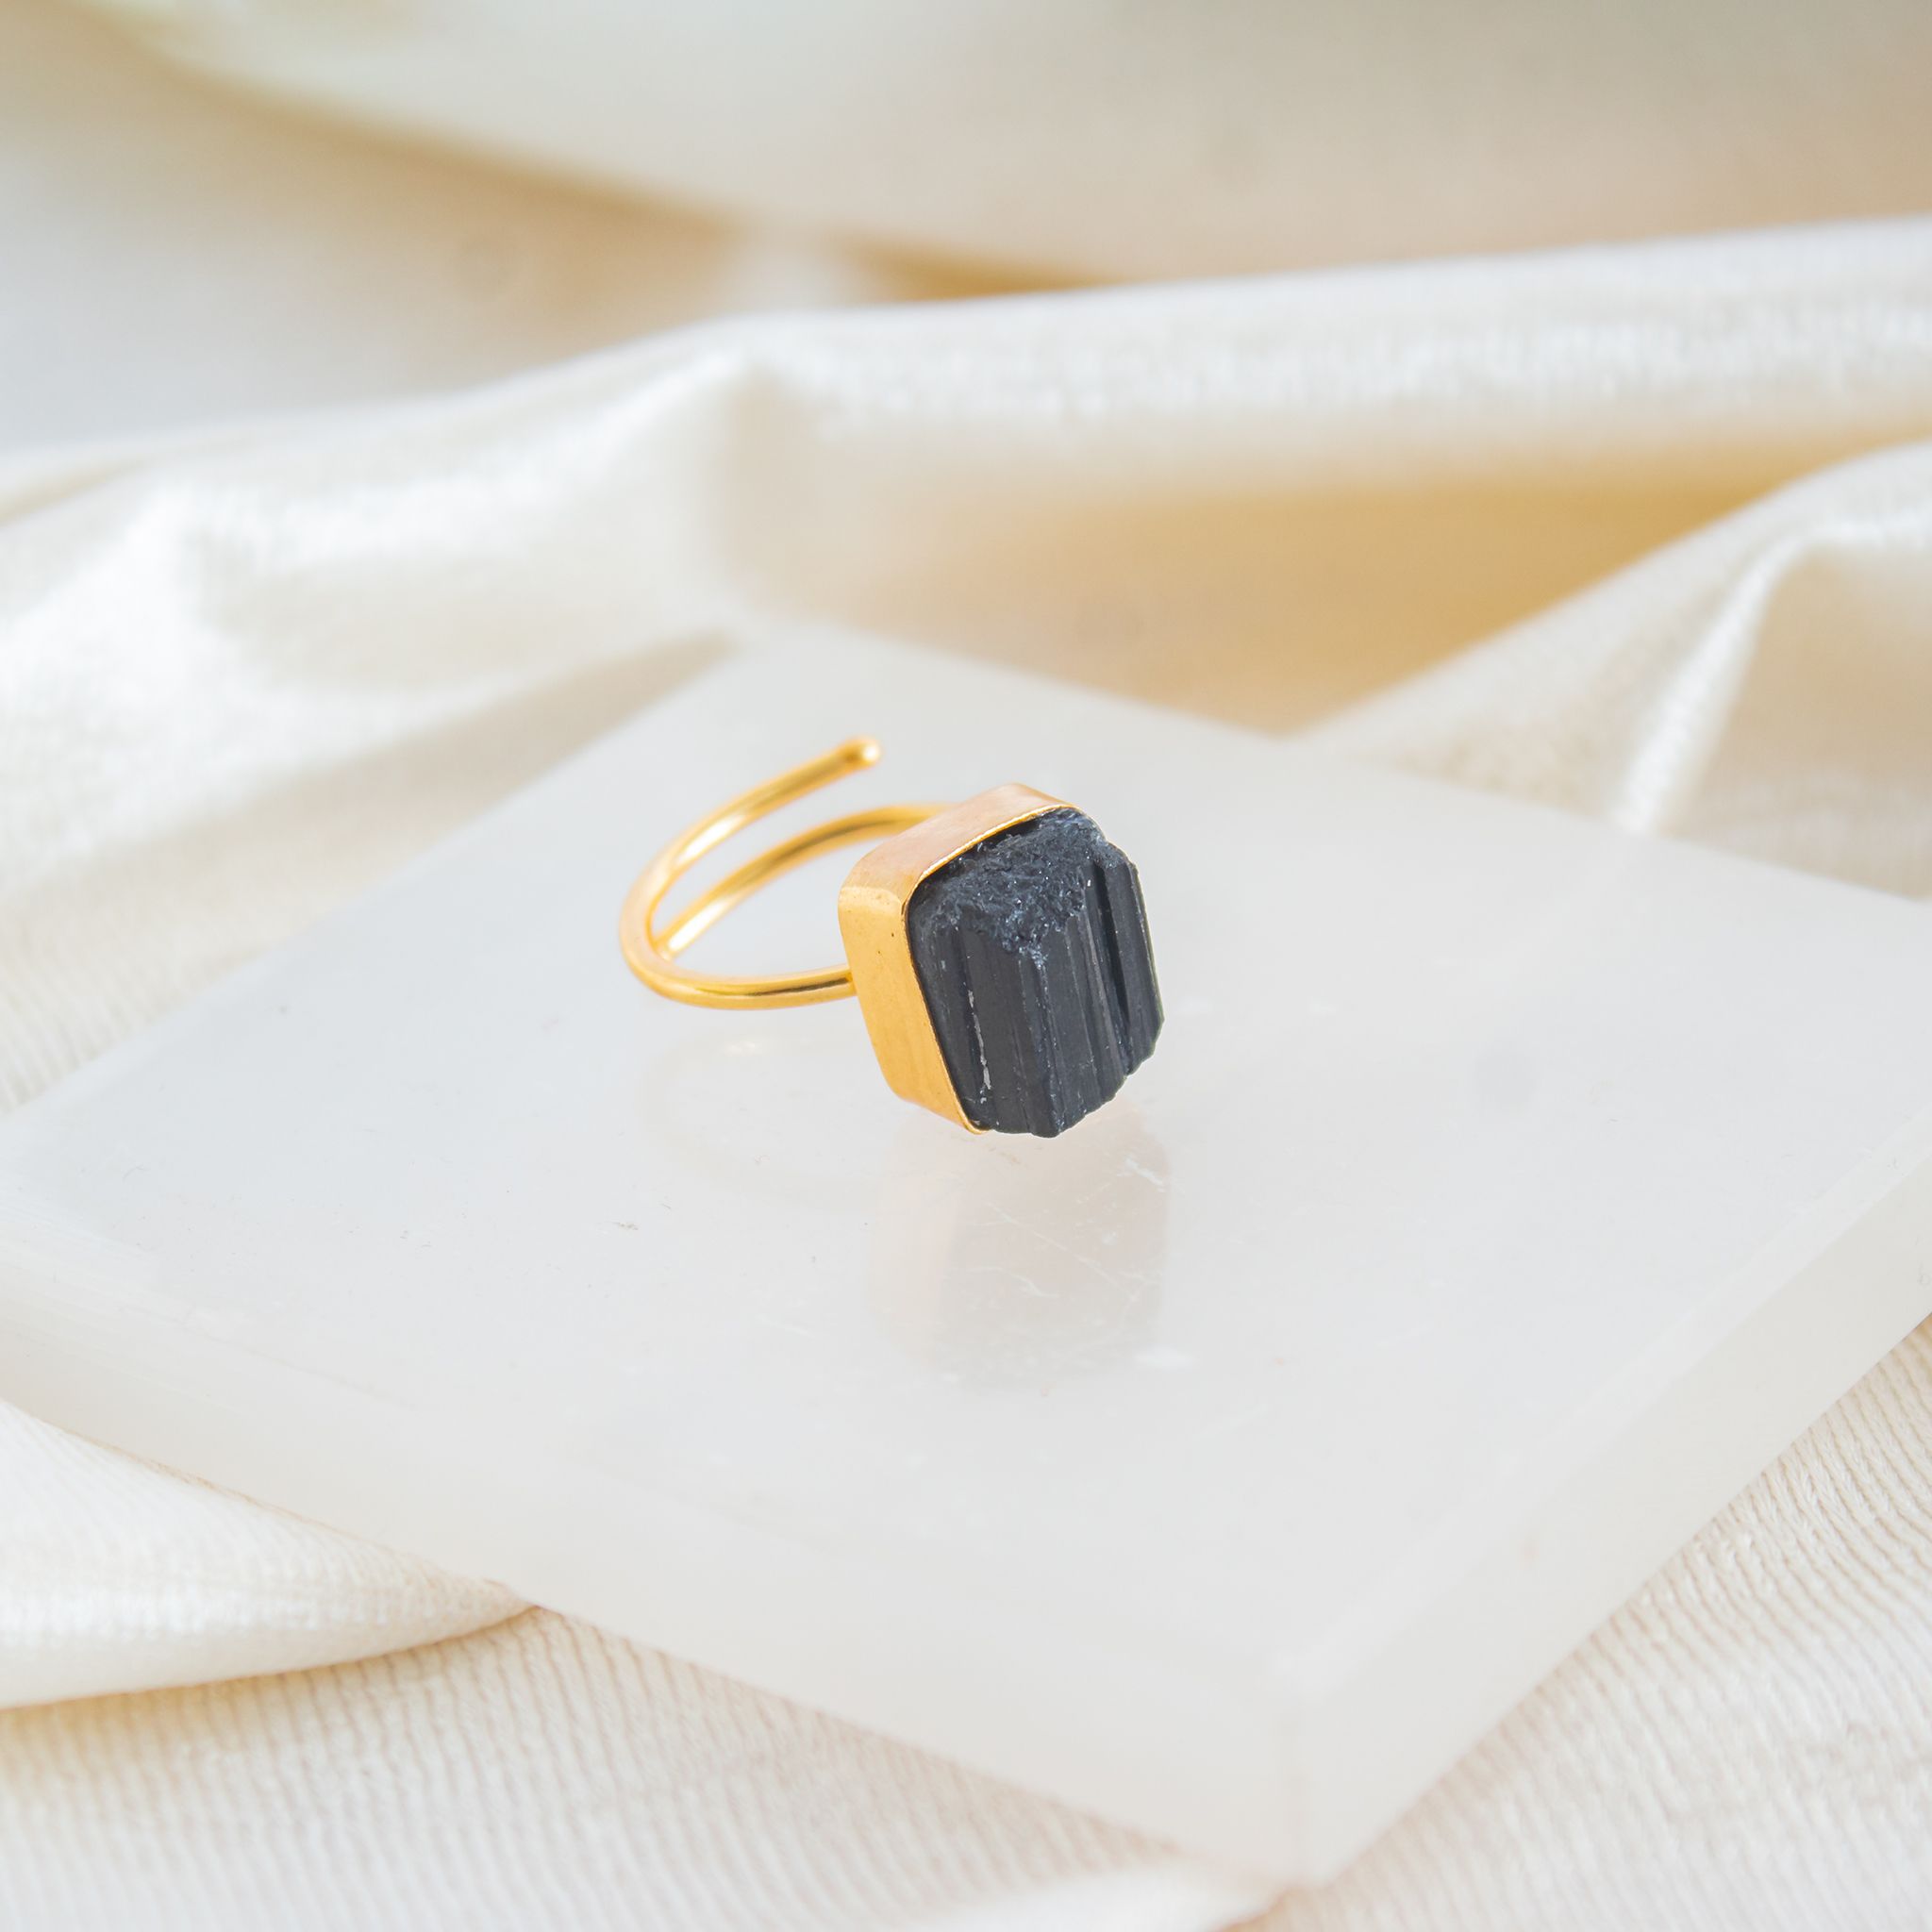 Blocking Black Tourmaline Silver Ring | Ooh! Aah! Jewelry | New Mexico  Jewelry Store | Albuquerque — Albuquerque | Jewelry | Rings | Ooh! Aah!  Jewelry